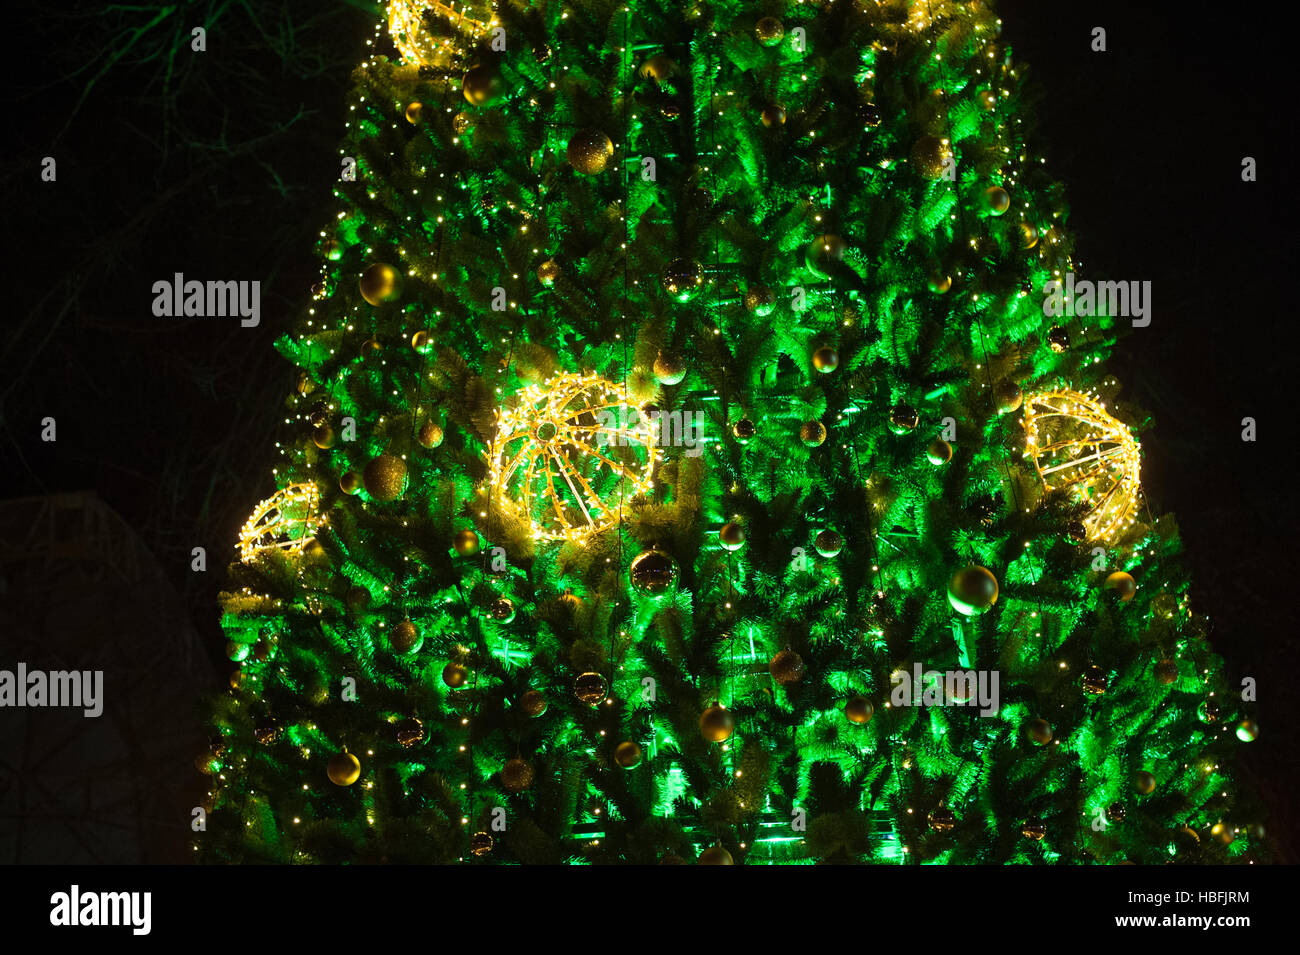 Green Christmas tree with garlands Stock Photo